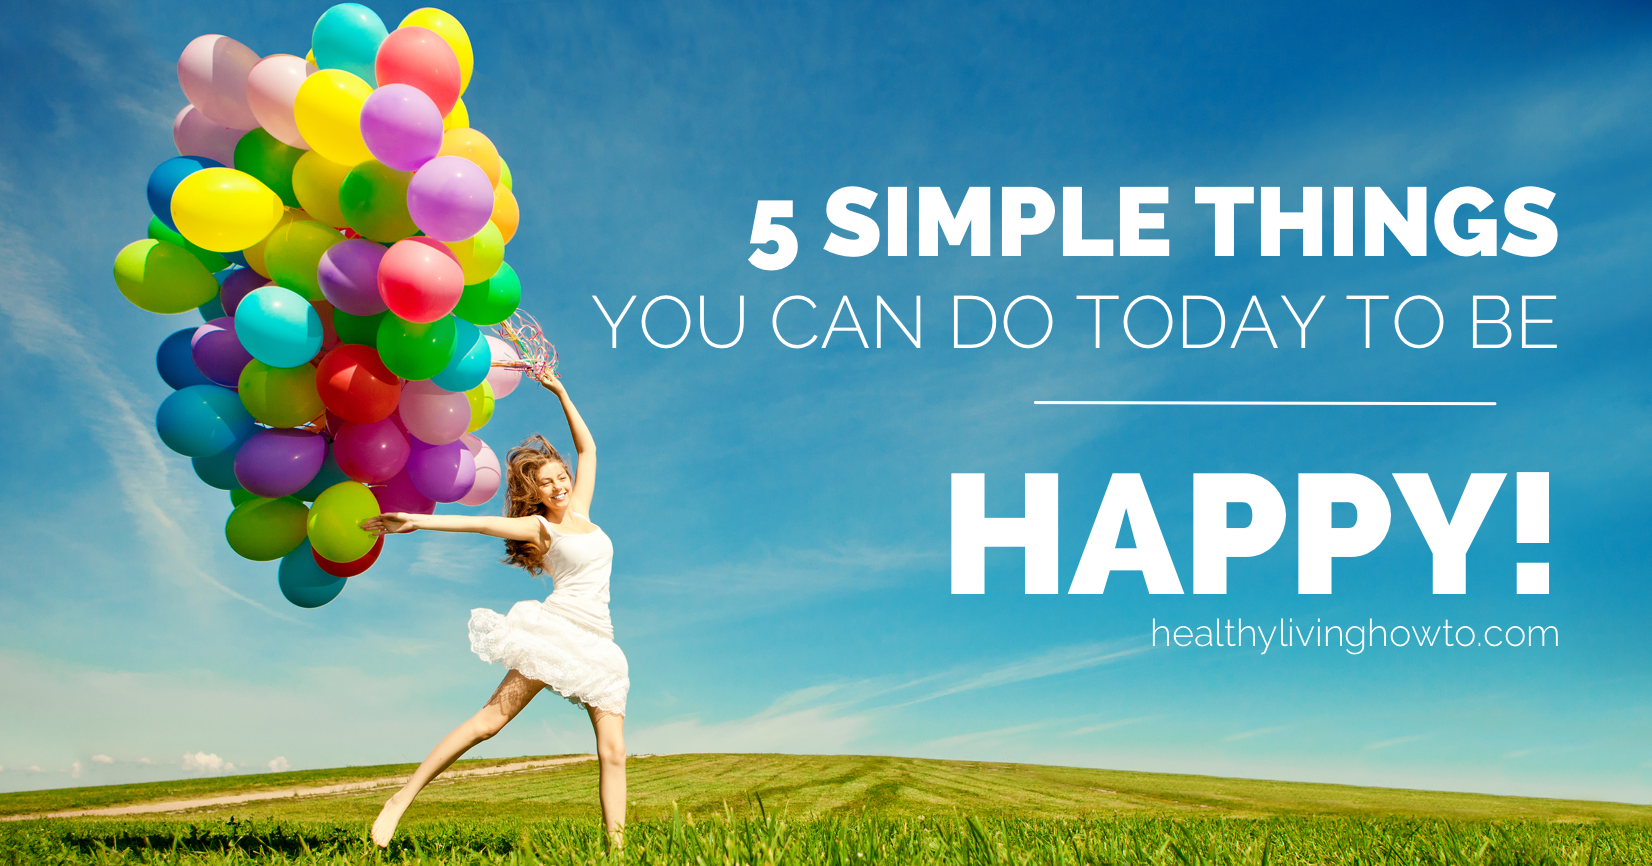 5 Simple Things You Can Do Today To Be Happy | healthylivinghowto.com